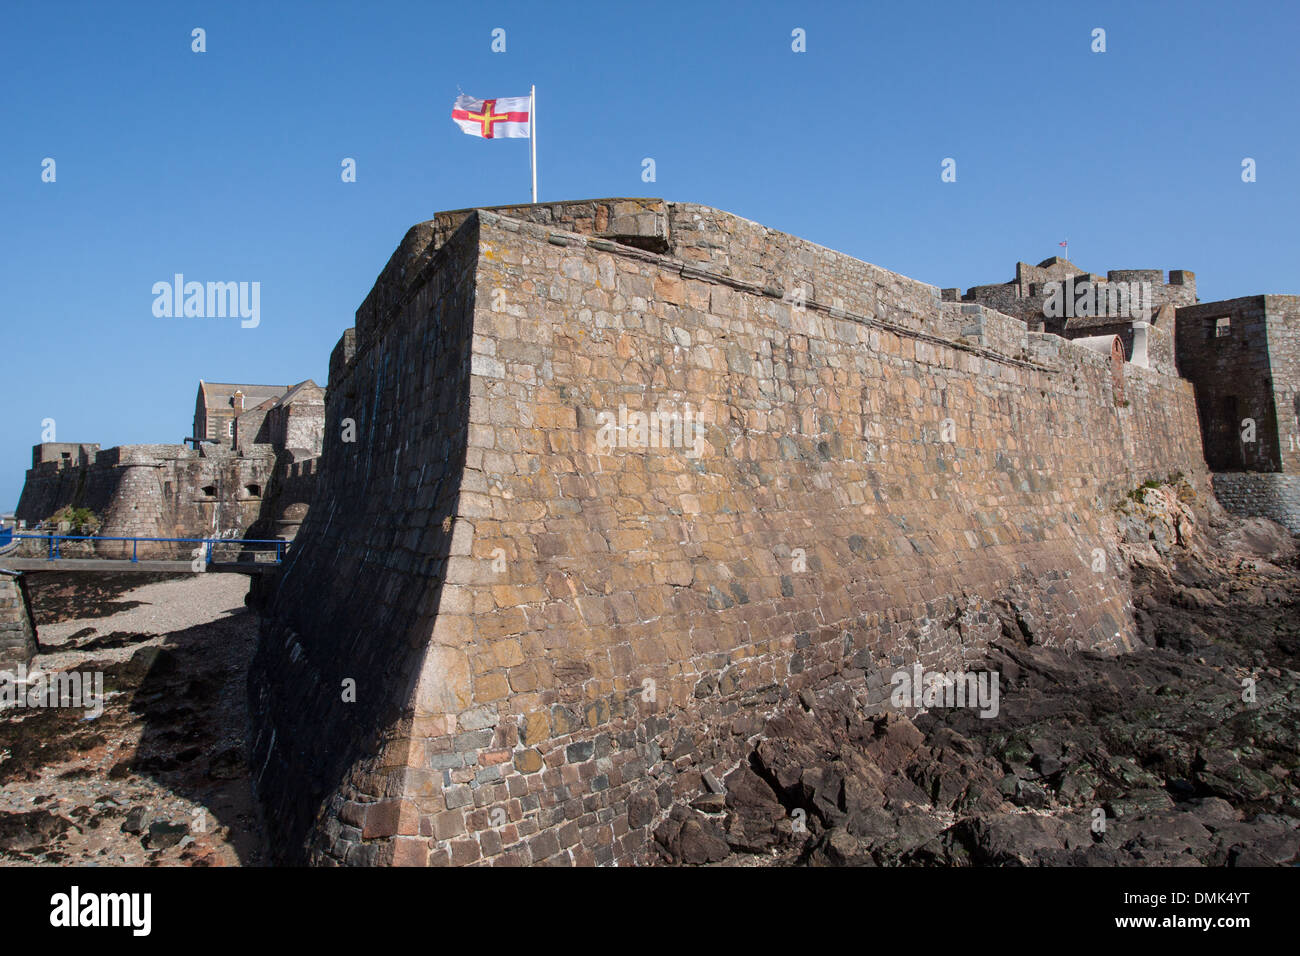 THE OUTER WALL OR BAILEY OF CASTLE CORNET, 13TH CENTURY FORTRESS, WITH THE GUERNSEY FLAG FLOATING IN THE WIND, SAINT PETER PORT, GUERNSEY, CHANNEL ISLANDS Stock Photo